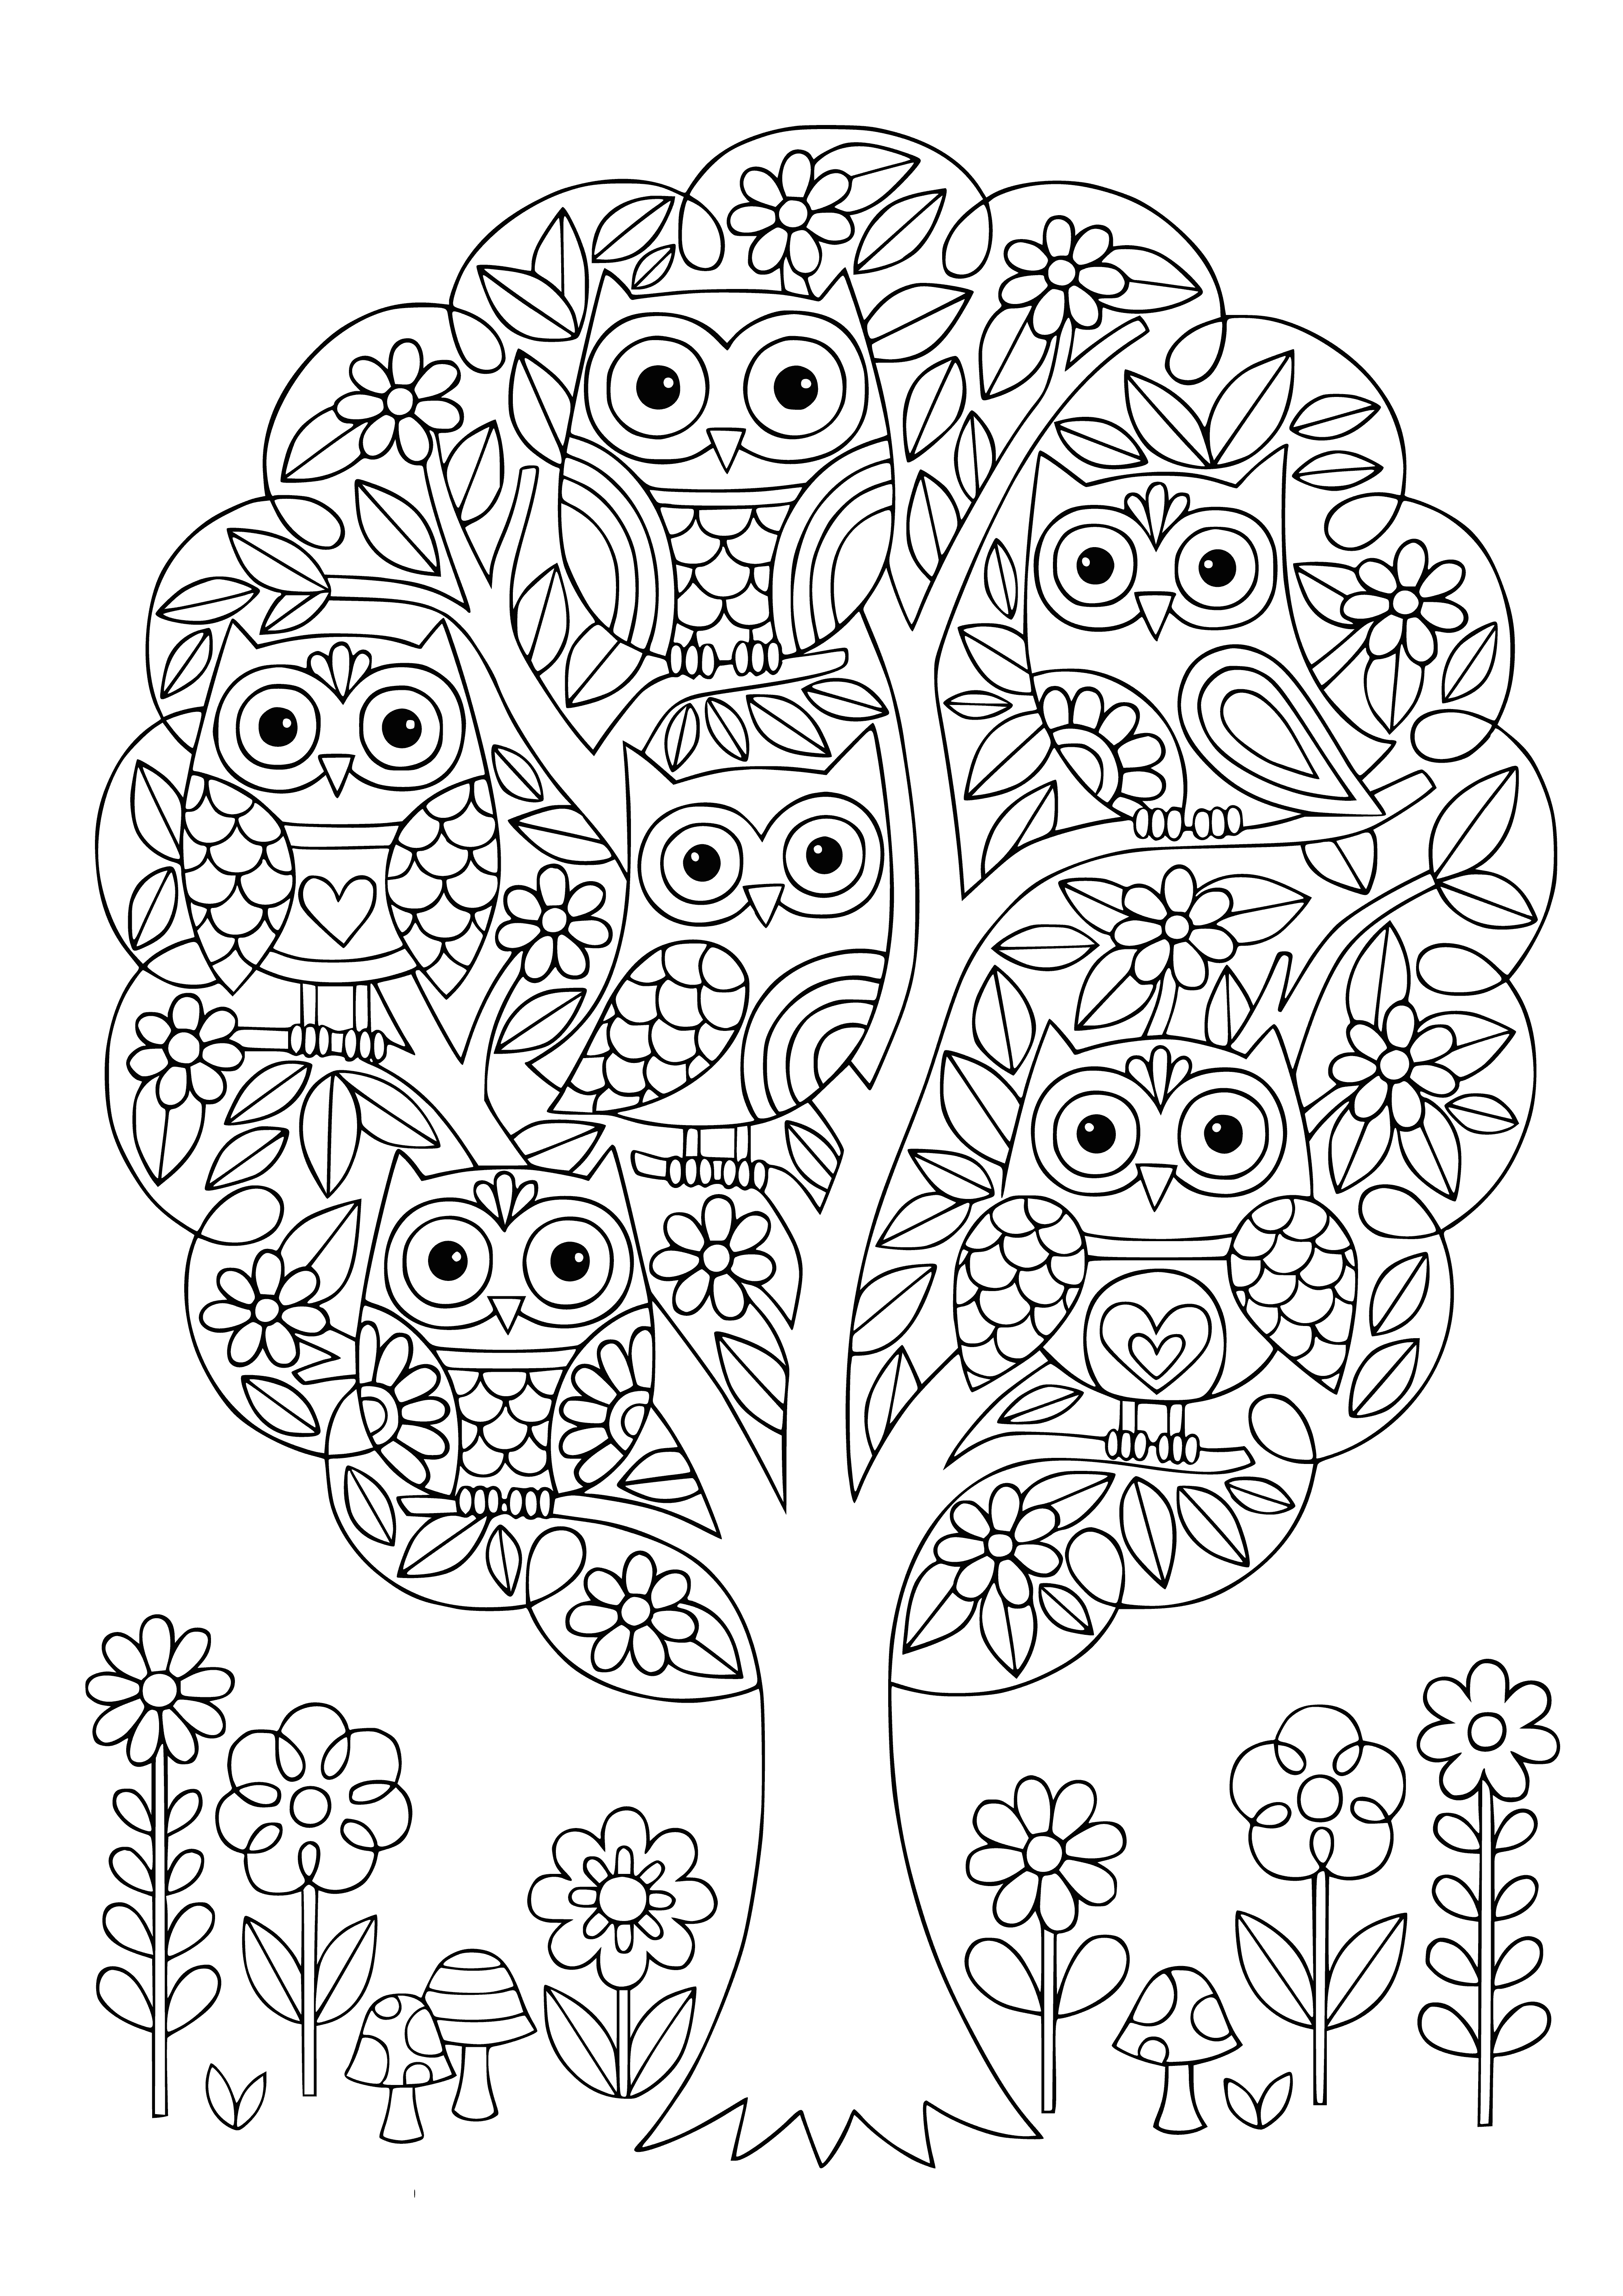 Owls on the tree coloring page